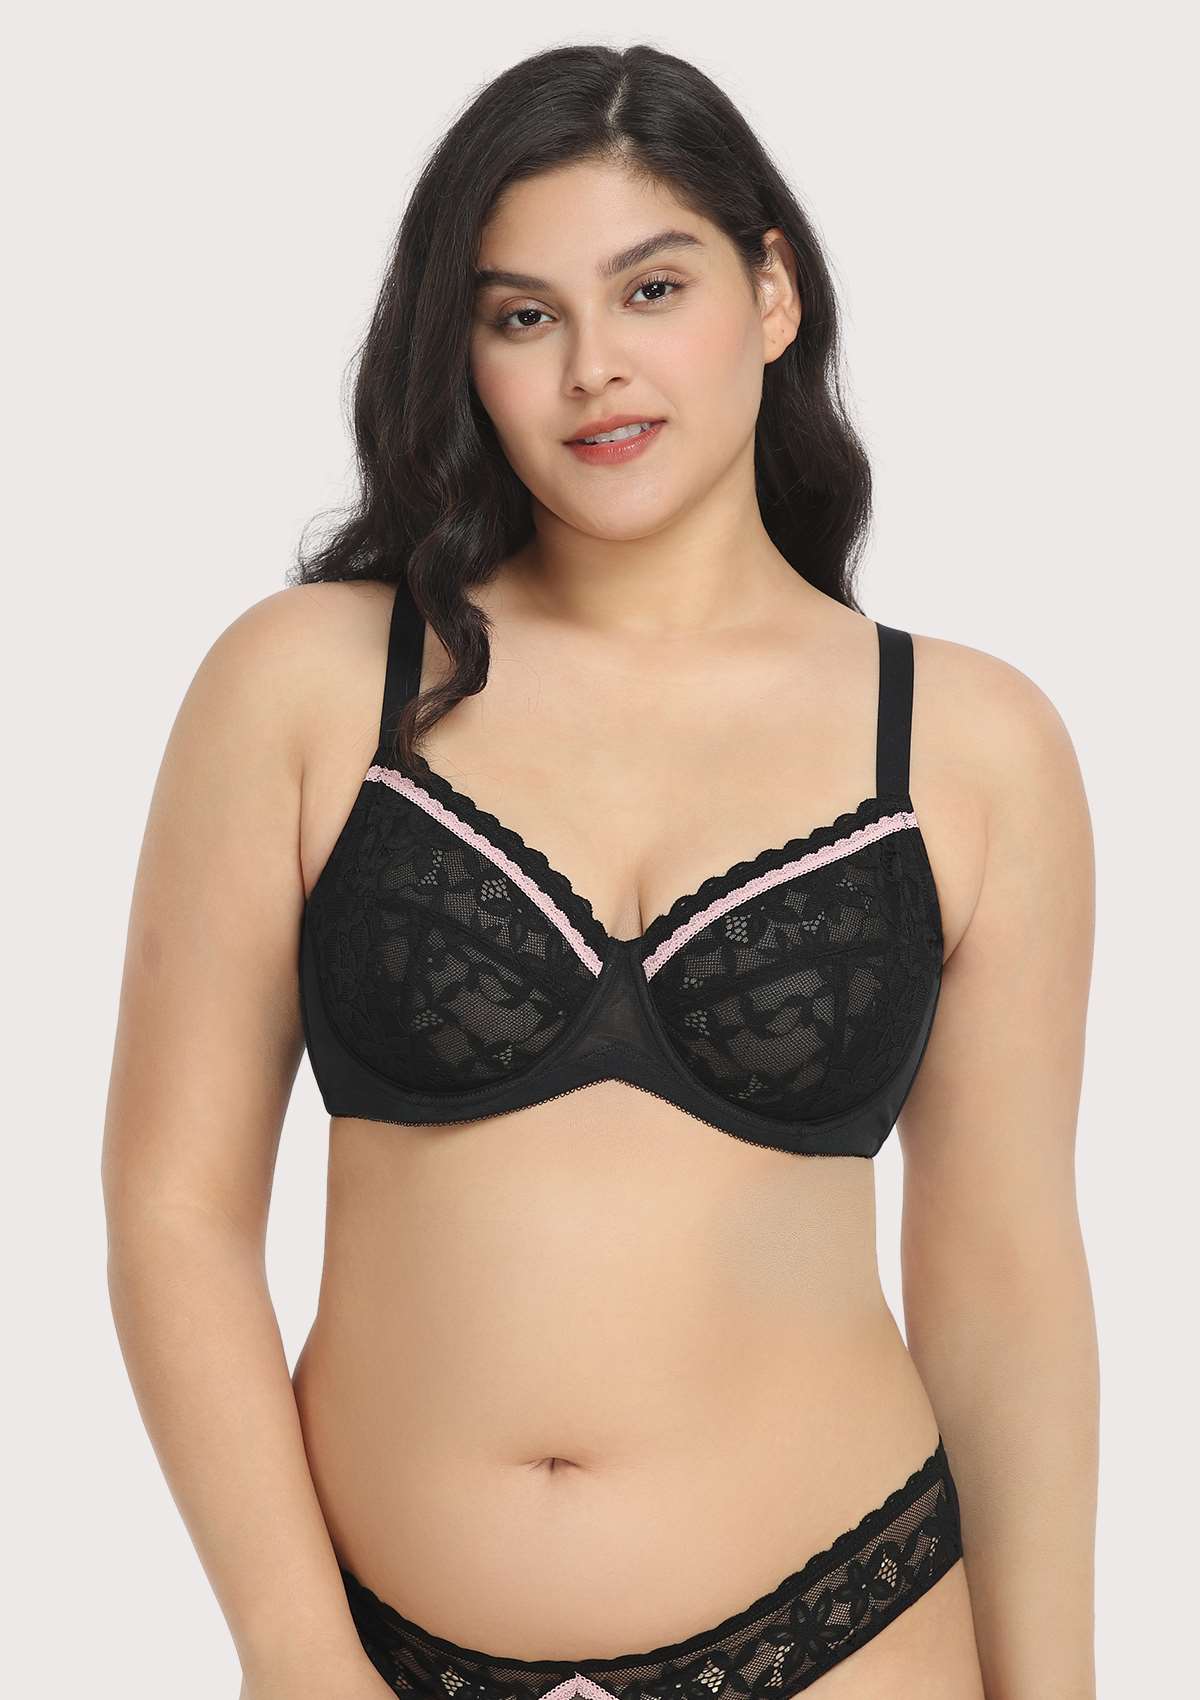 Plus Size Naughty Bra Women's Plus Contrast Lace Unlined Dig